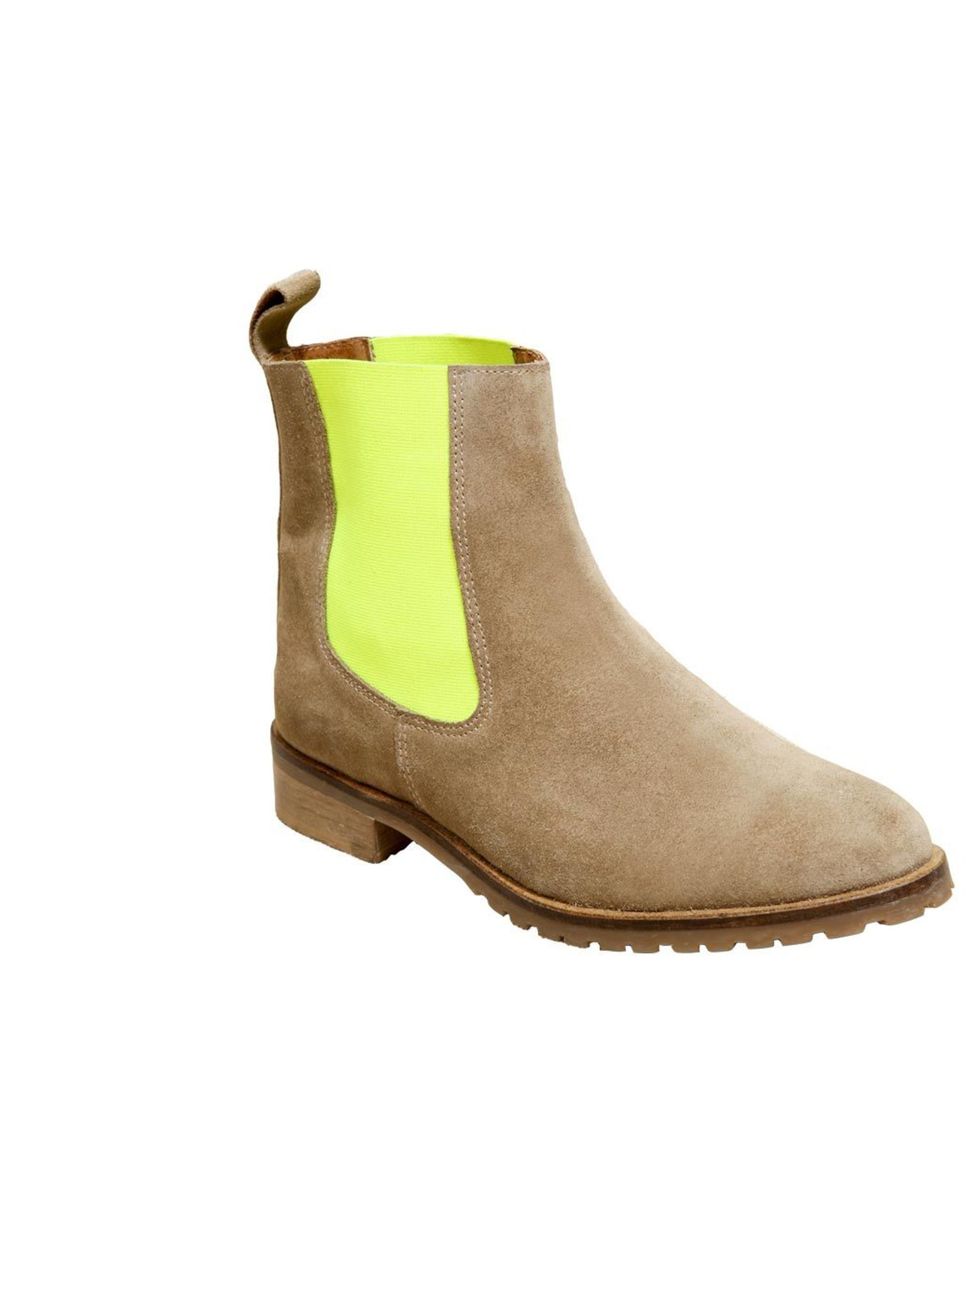 <p>Already causing a stir in the ELLE office, these neon Chelsea boots (never thought wed say that) are sure to be snapped up quick... <a href="http://www.urbanoutfitters.co.uk/leon-sand-+amp-neon-yellow-chelsea-boots/invt/5318429450553/&amp;bklis">Urban